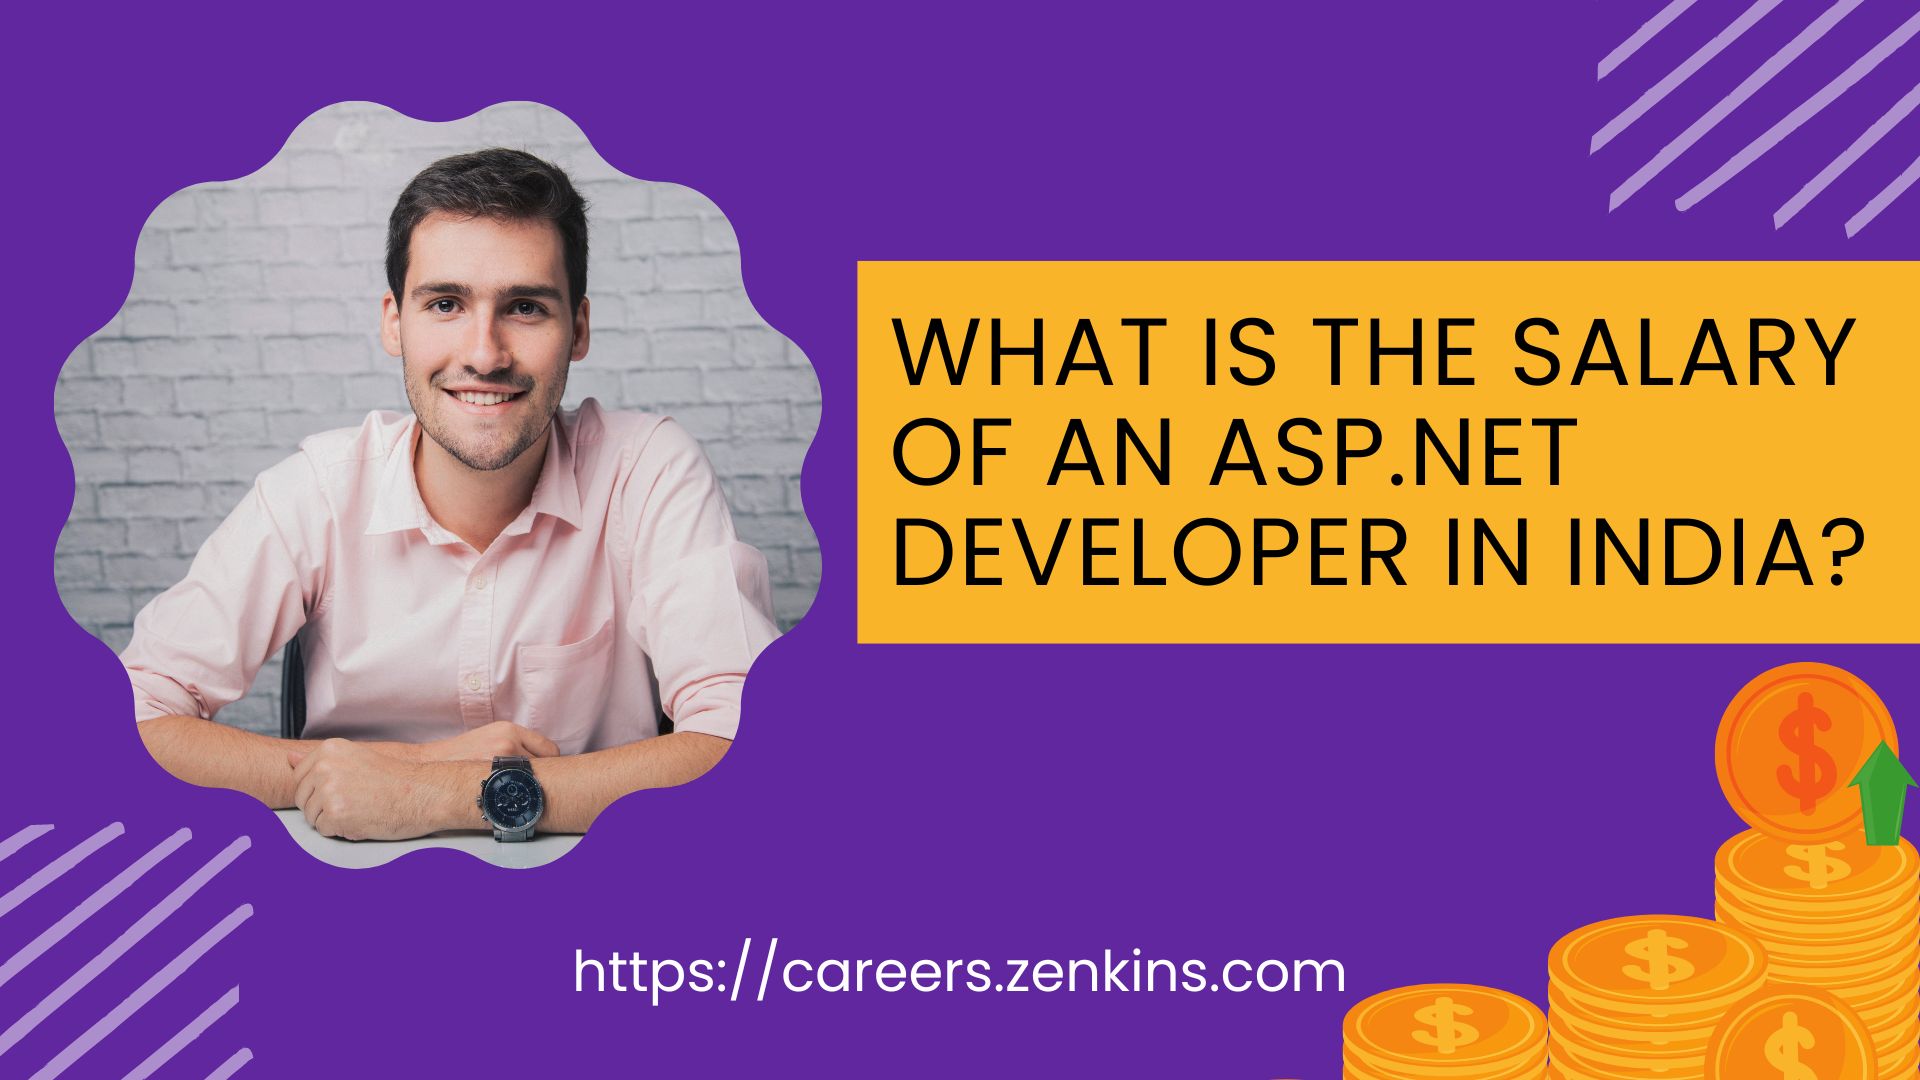 What is the salary of an ASP.NET Developer in India?